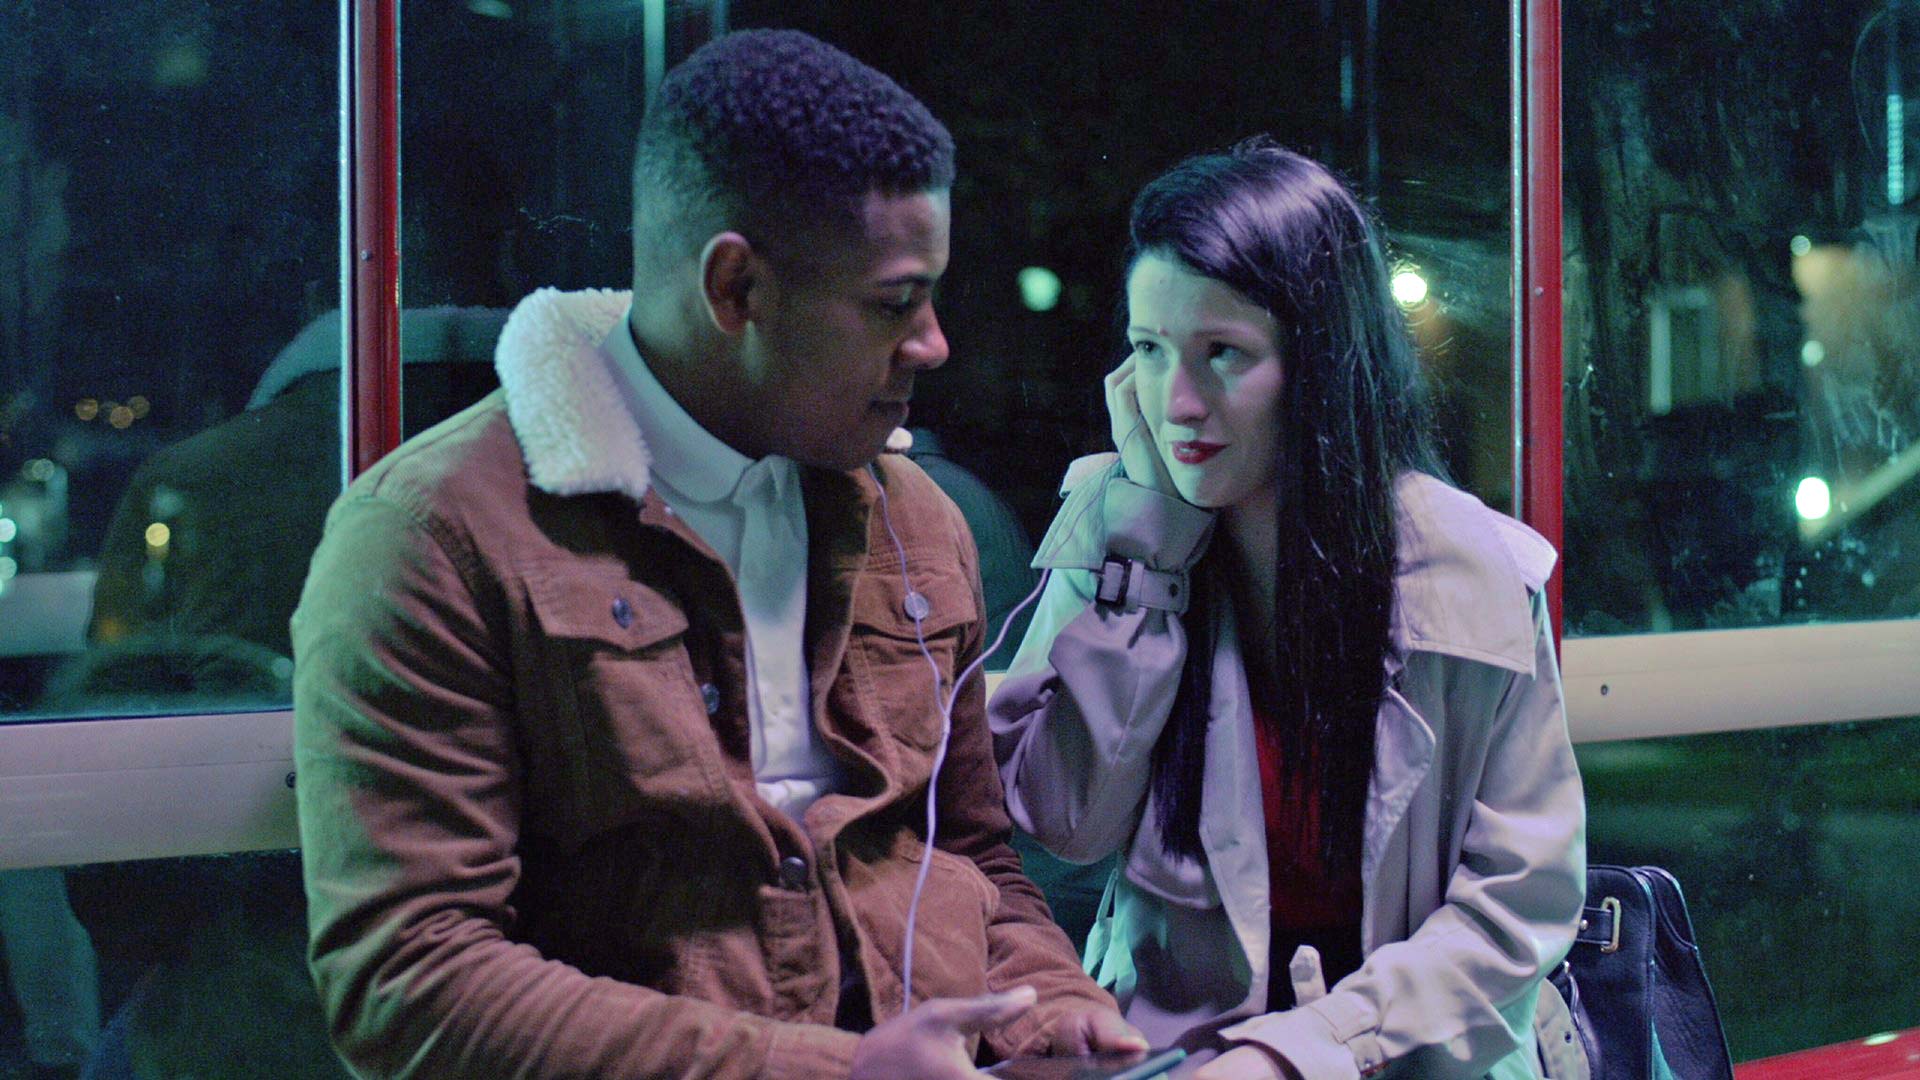 Northern Film School student Aymeric Nicolet’s romantically charged film, “Bus Stop Romeo”, shot in Leeds